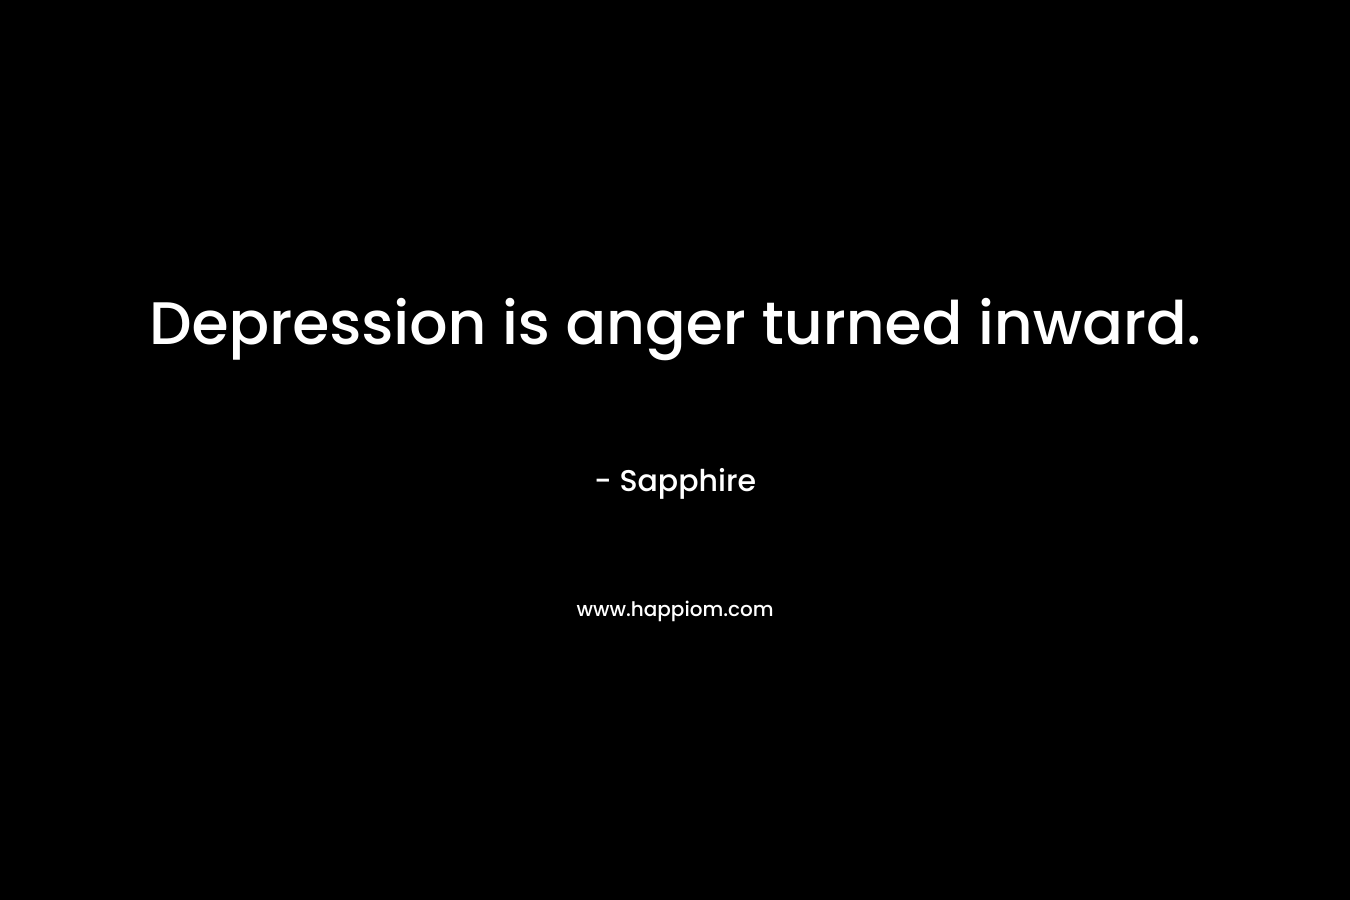 Depression is anger turned inward.